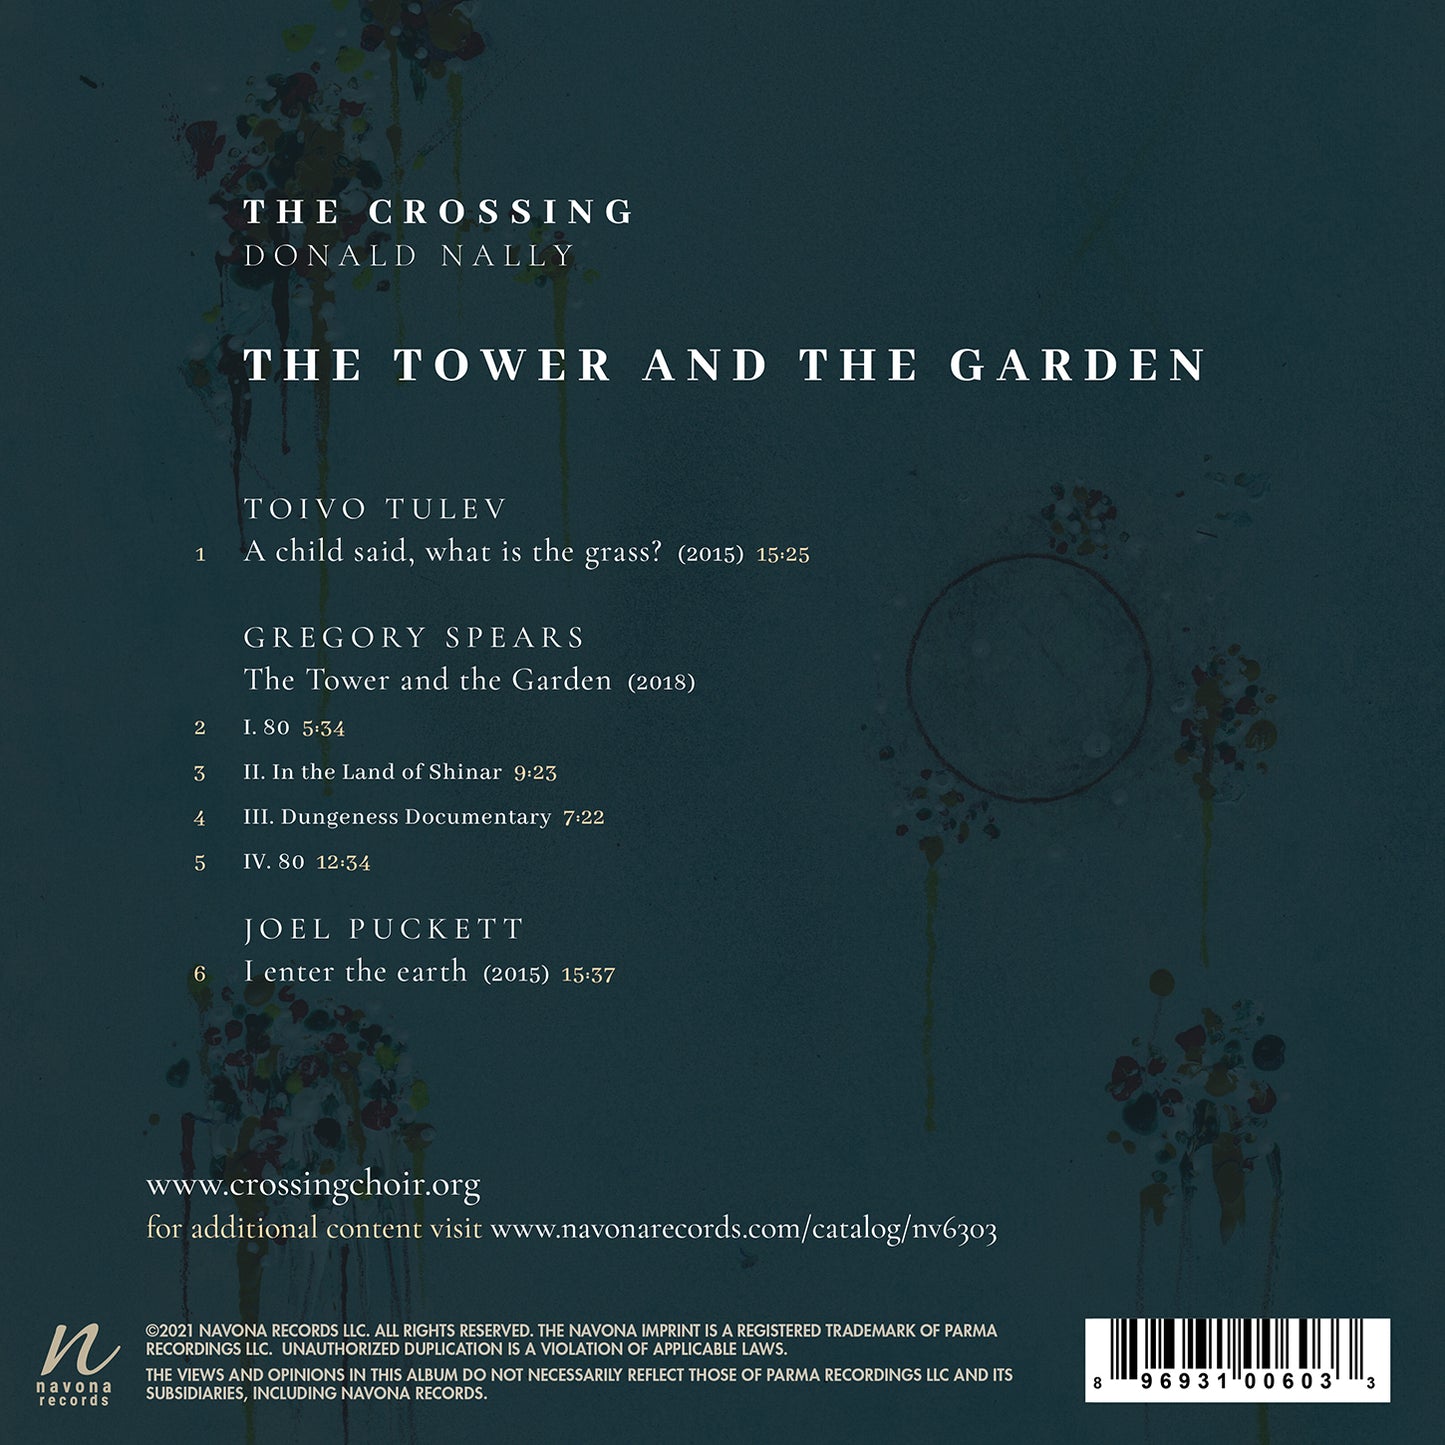 The Crossing: The Tower And The Garden